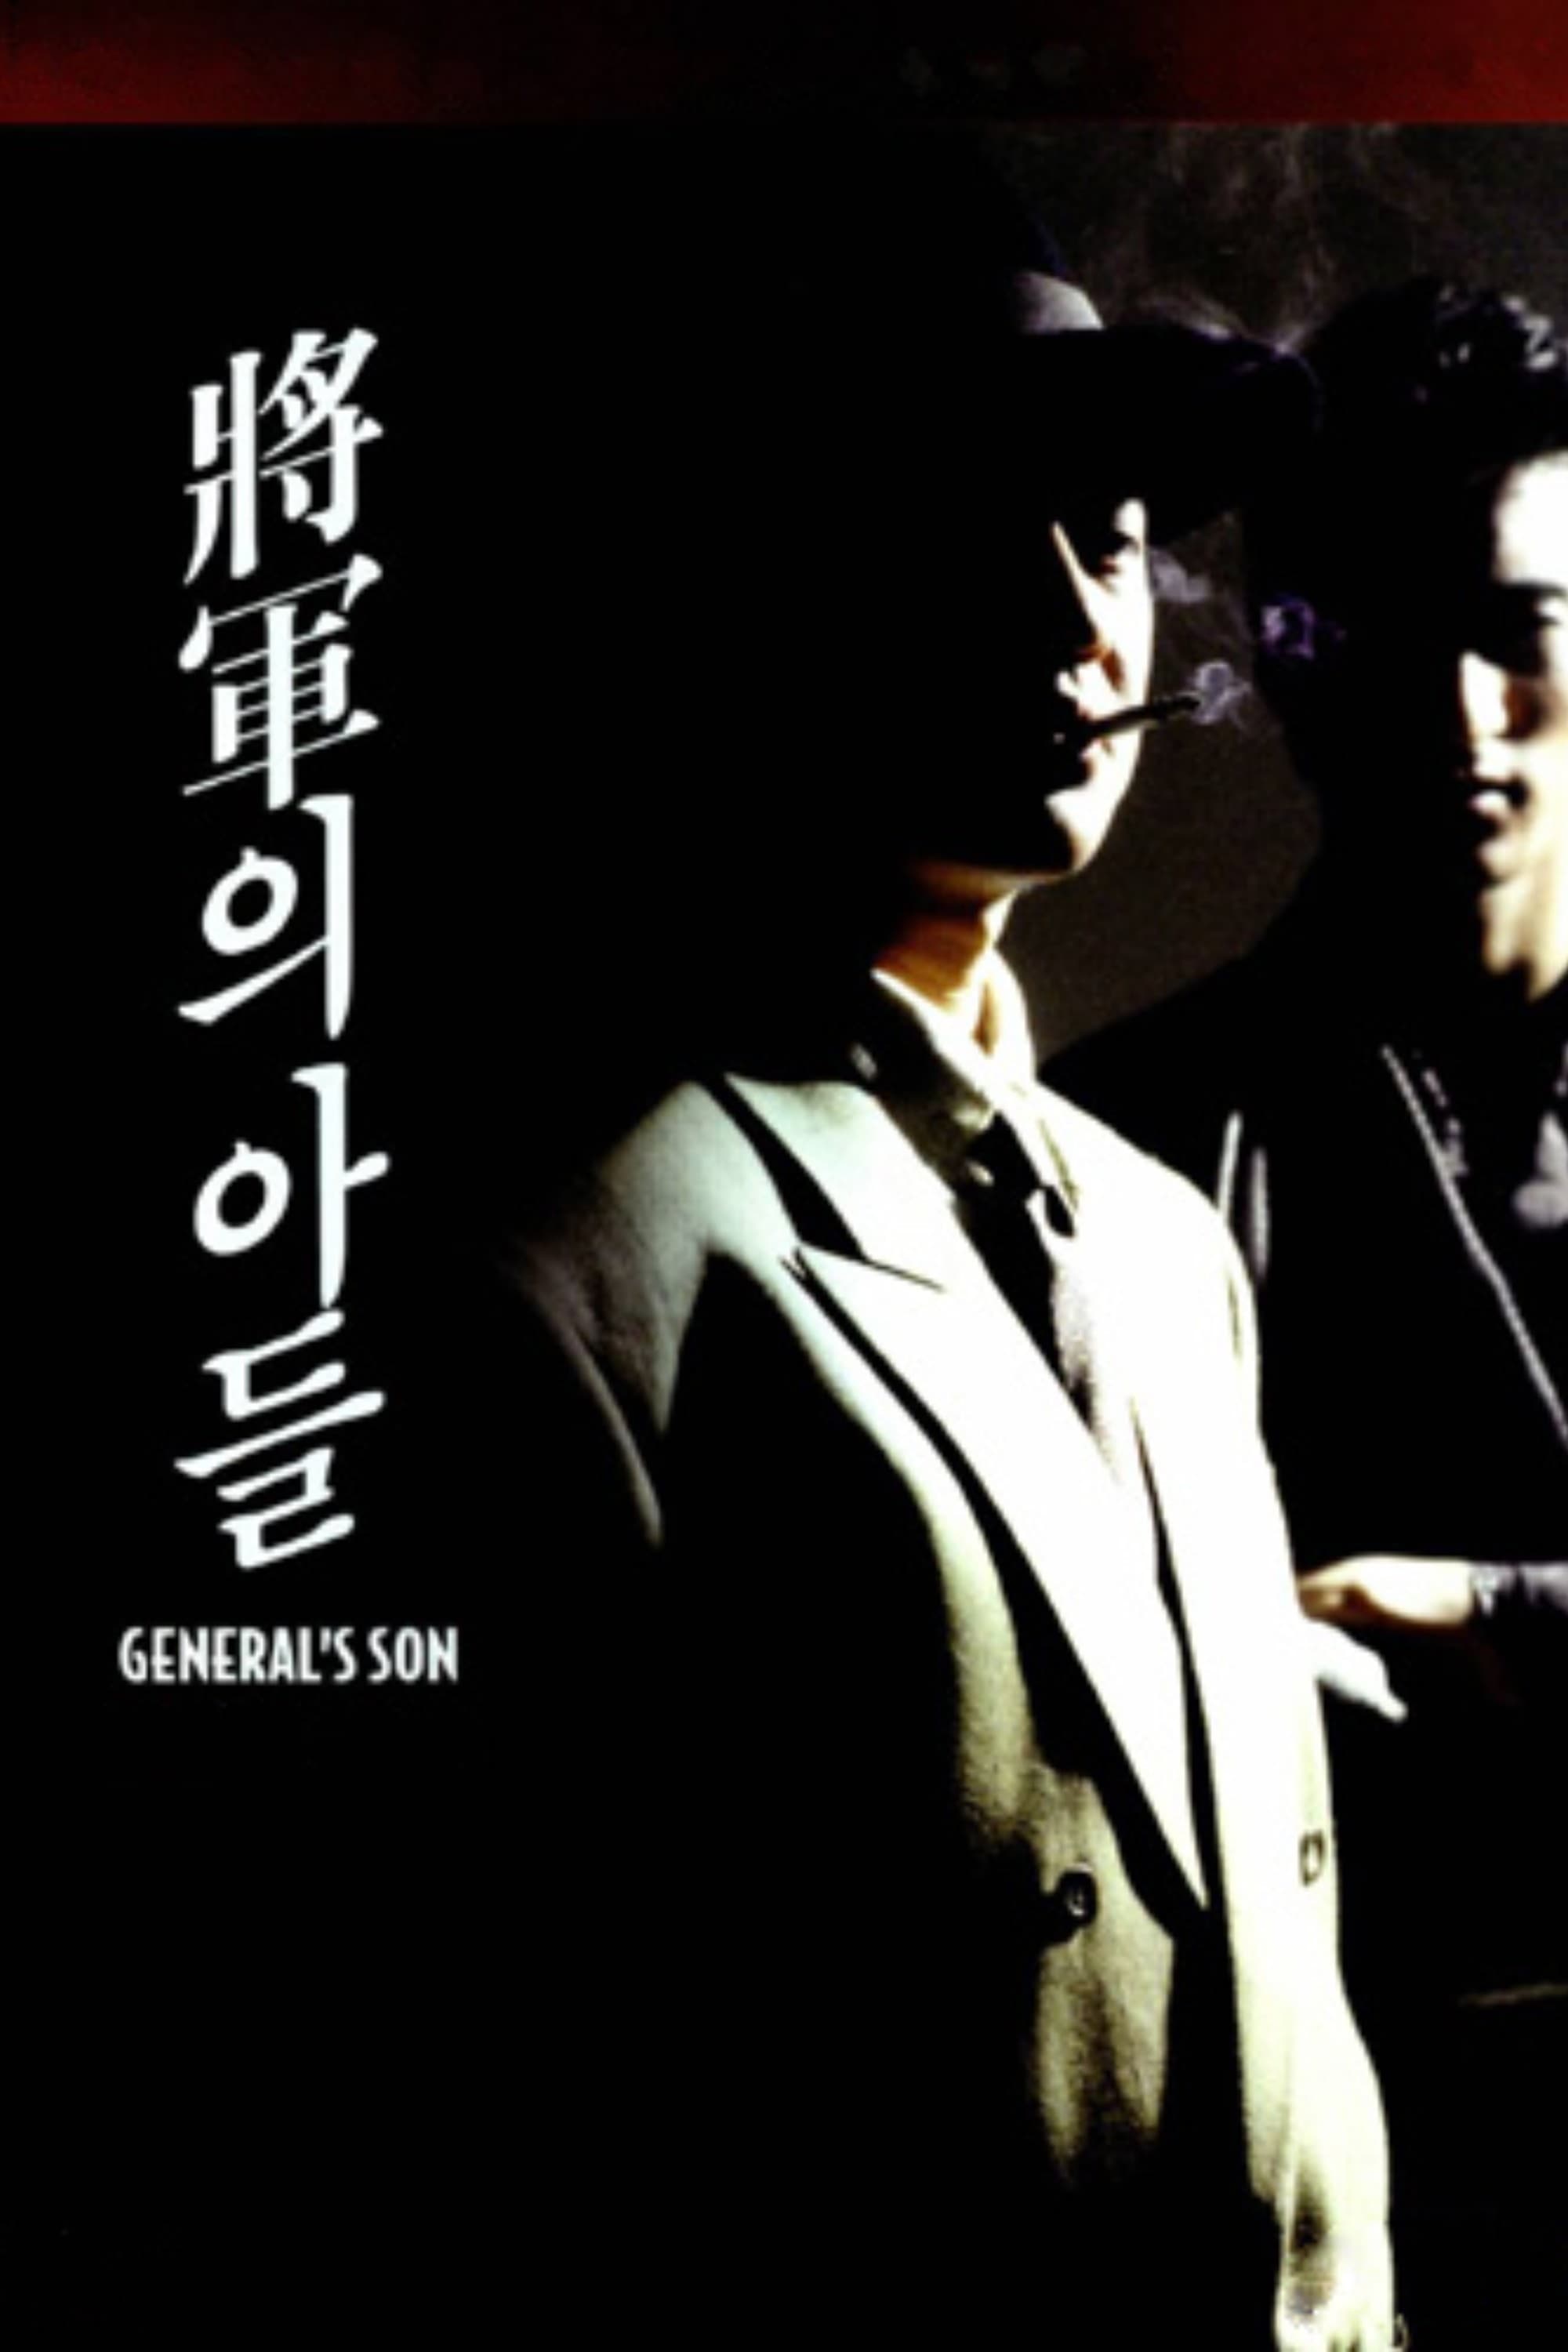 General's Son (1990)